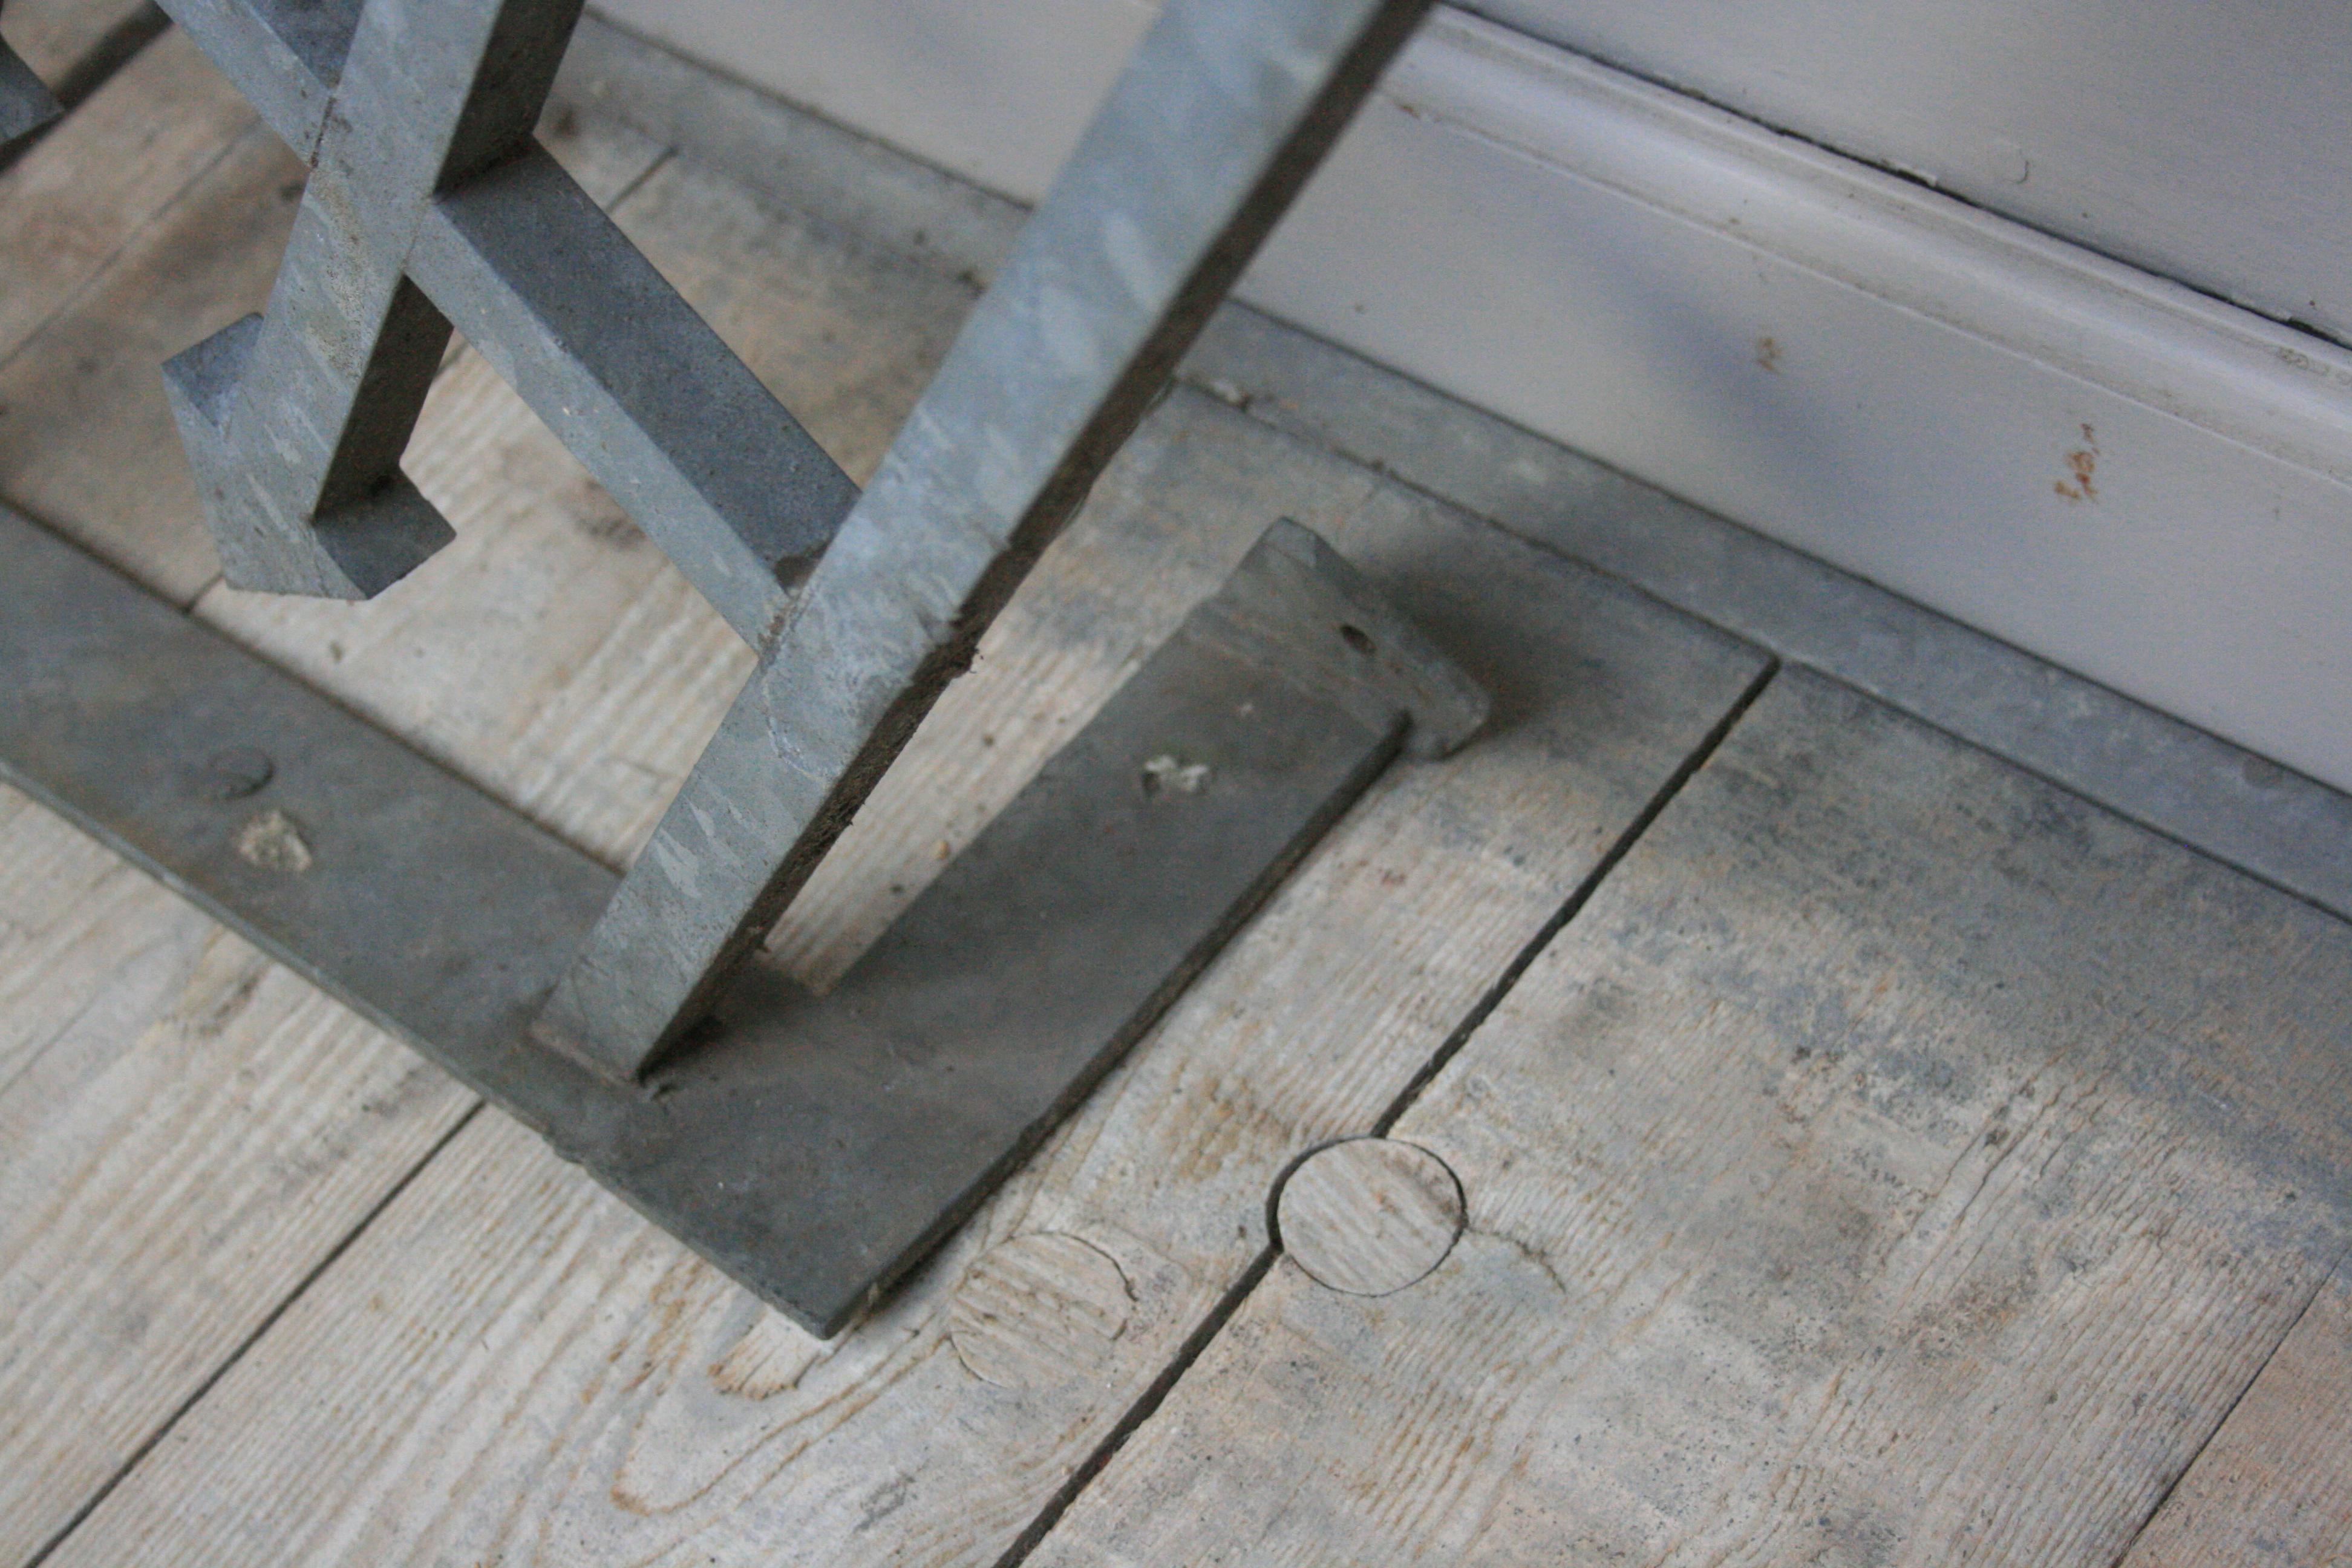 Late 19th Century Antique Wrought Iron Stair Railing, Sandblasted and Galvanized For Sale